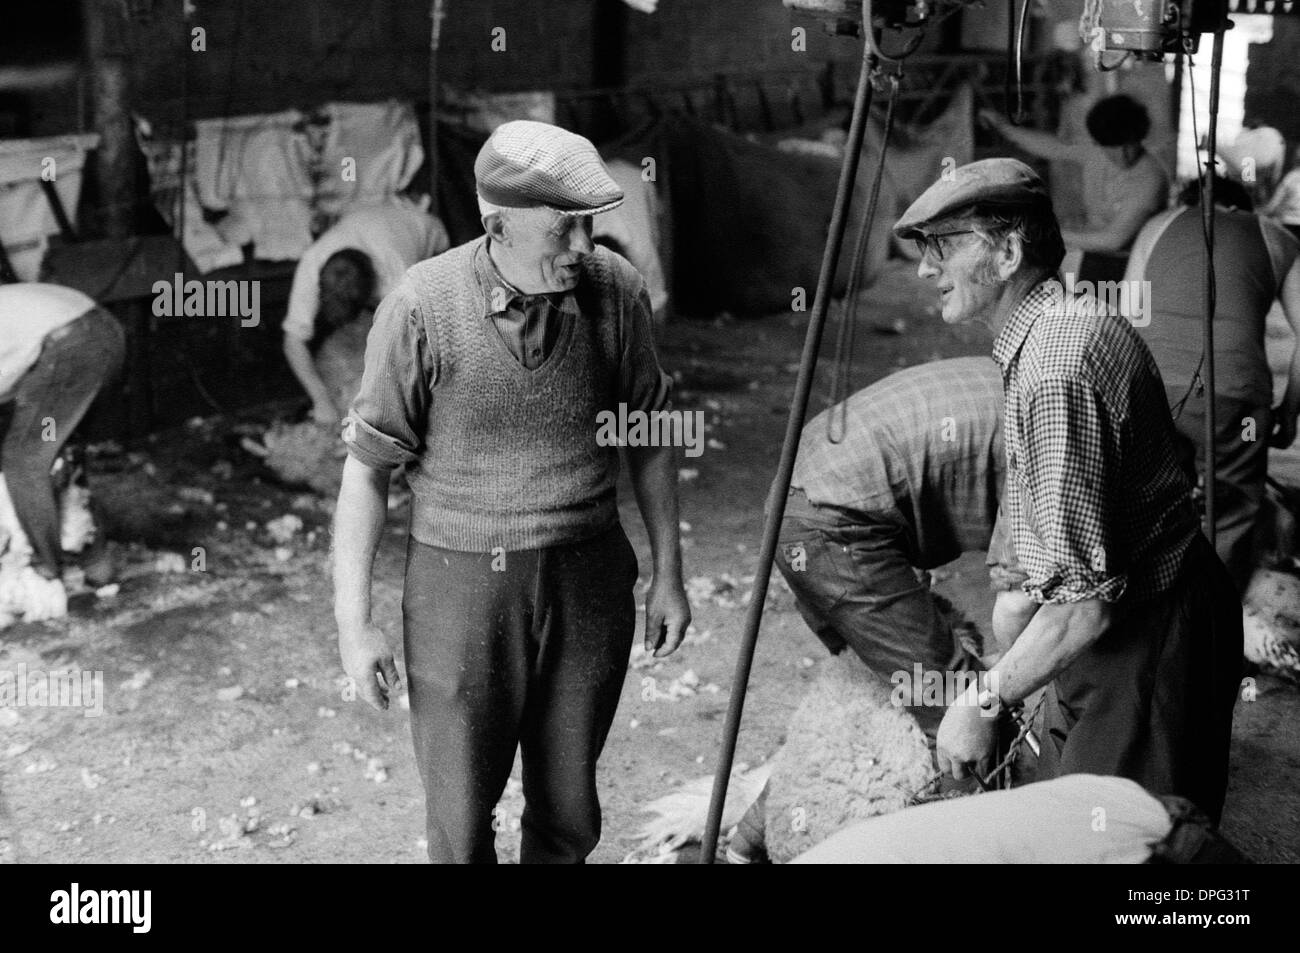 Shearers Black and White Stock Photos & Images - Alamy